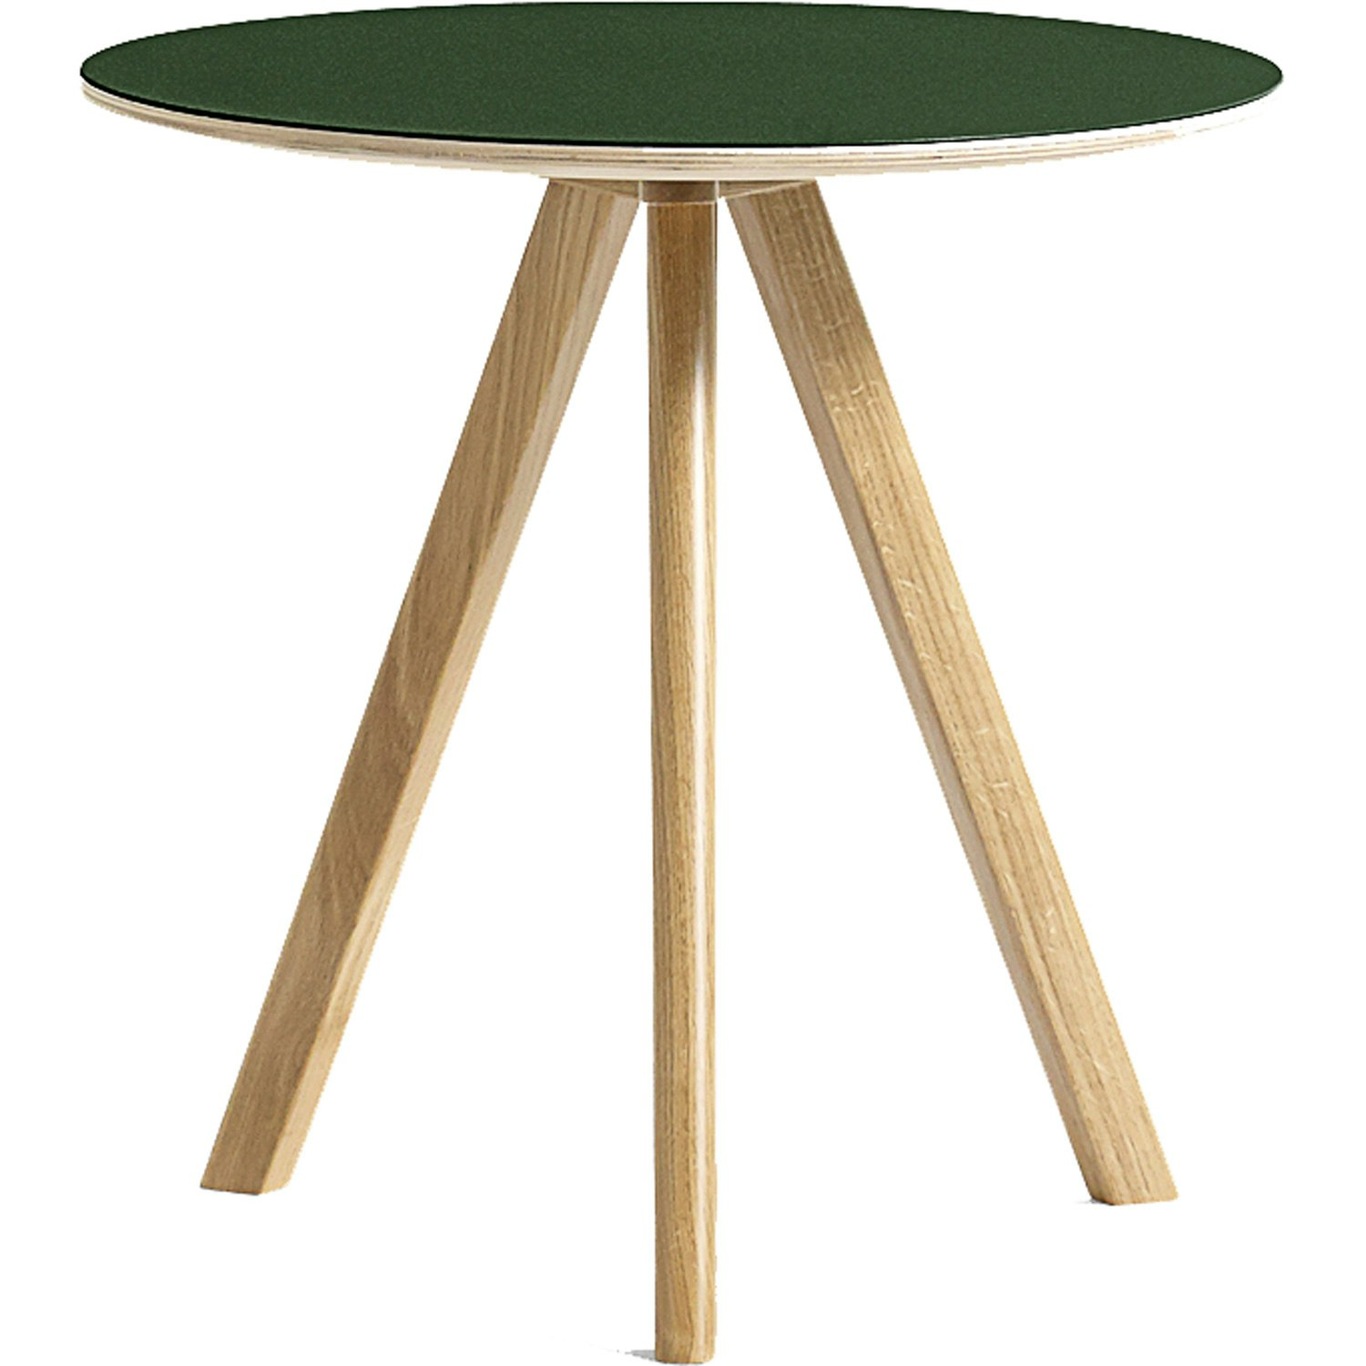 CPH 20 Side Table Ø50 cm, Water Based Lacquered Oak / Green Linoleum